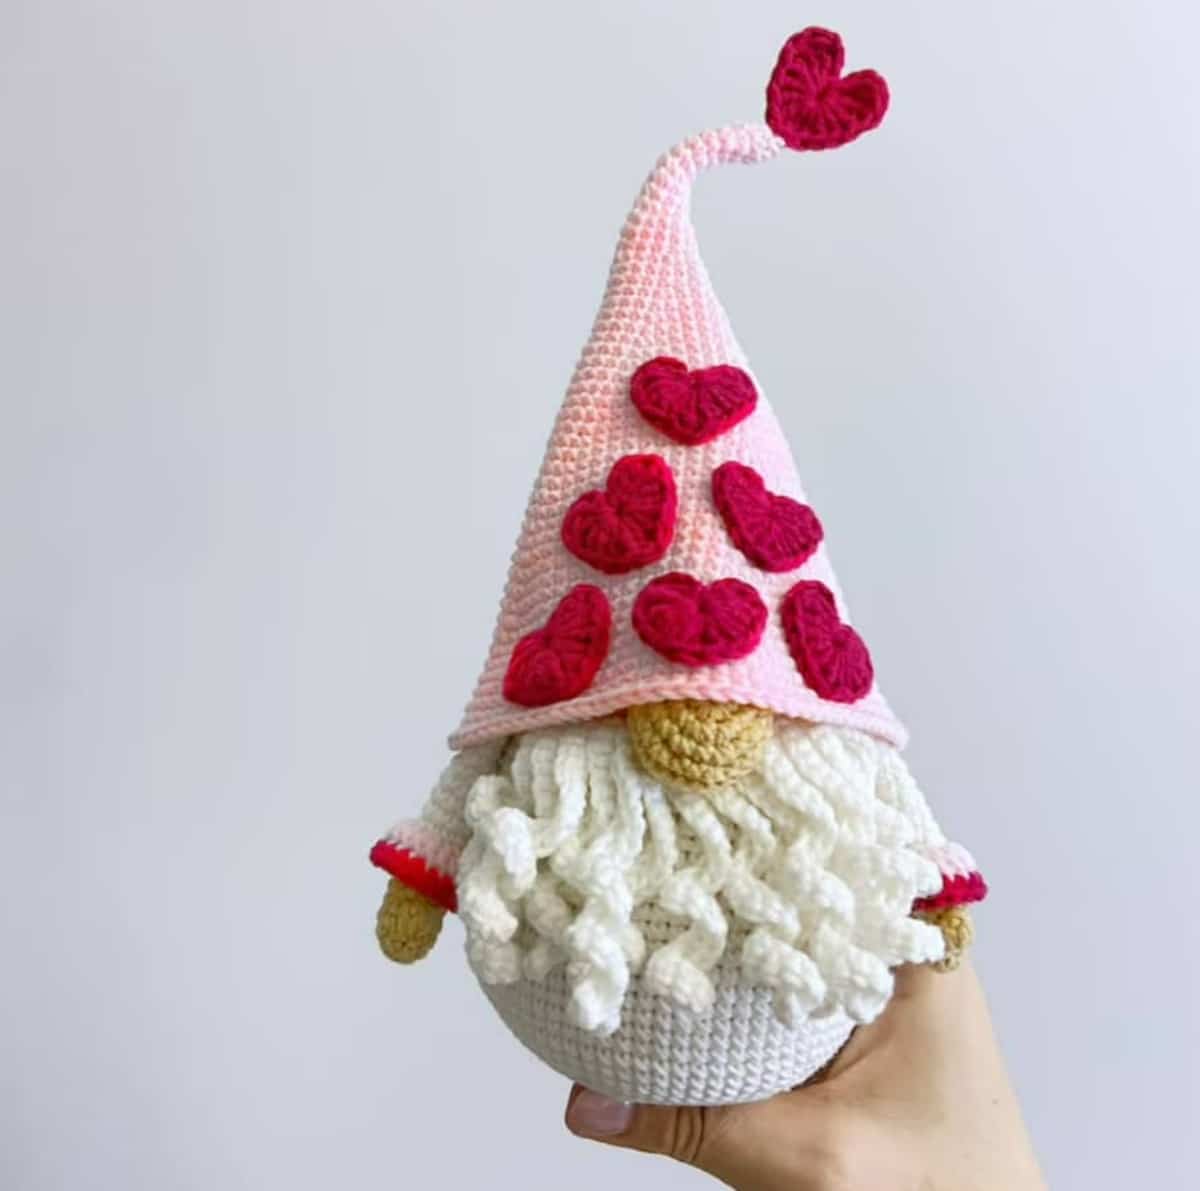 A hand holding a crochet stuffed gnome wearing a large pale pink pointed hat with pink flowers stitched all over and a white beard sticking out.Valentine Gnome Crochet Pattern - (HappyDollsHandMade)